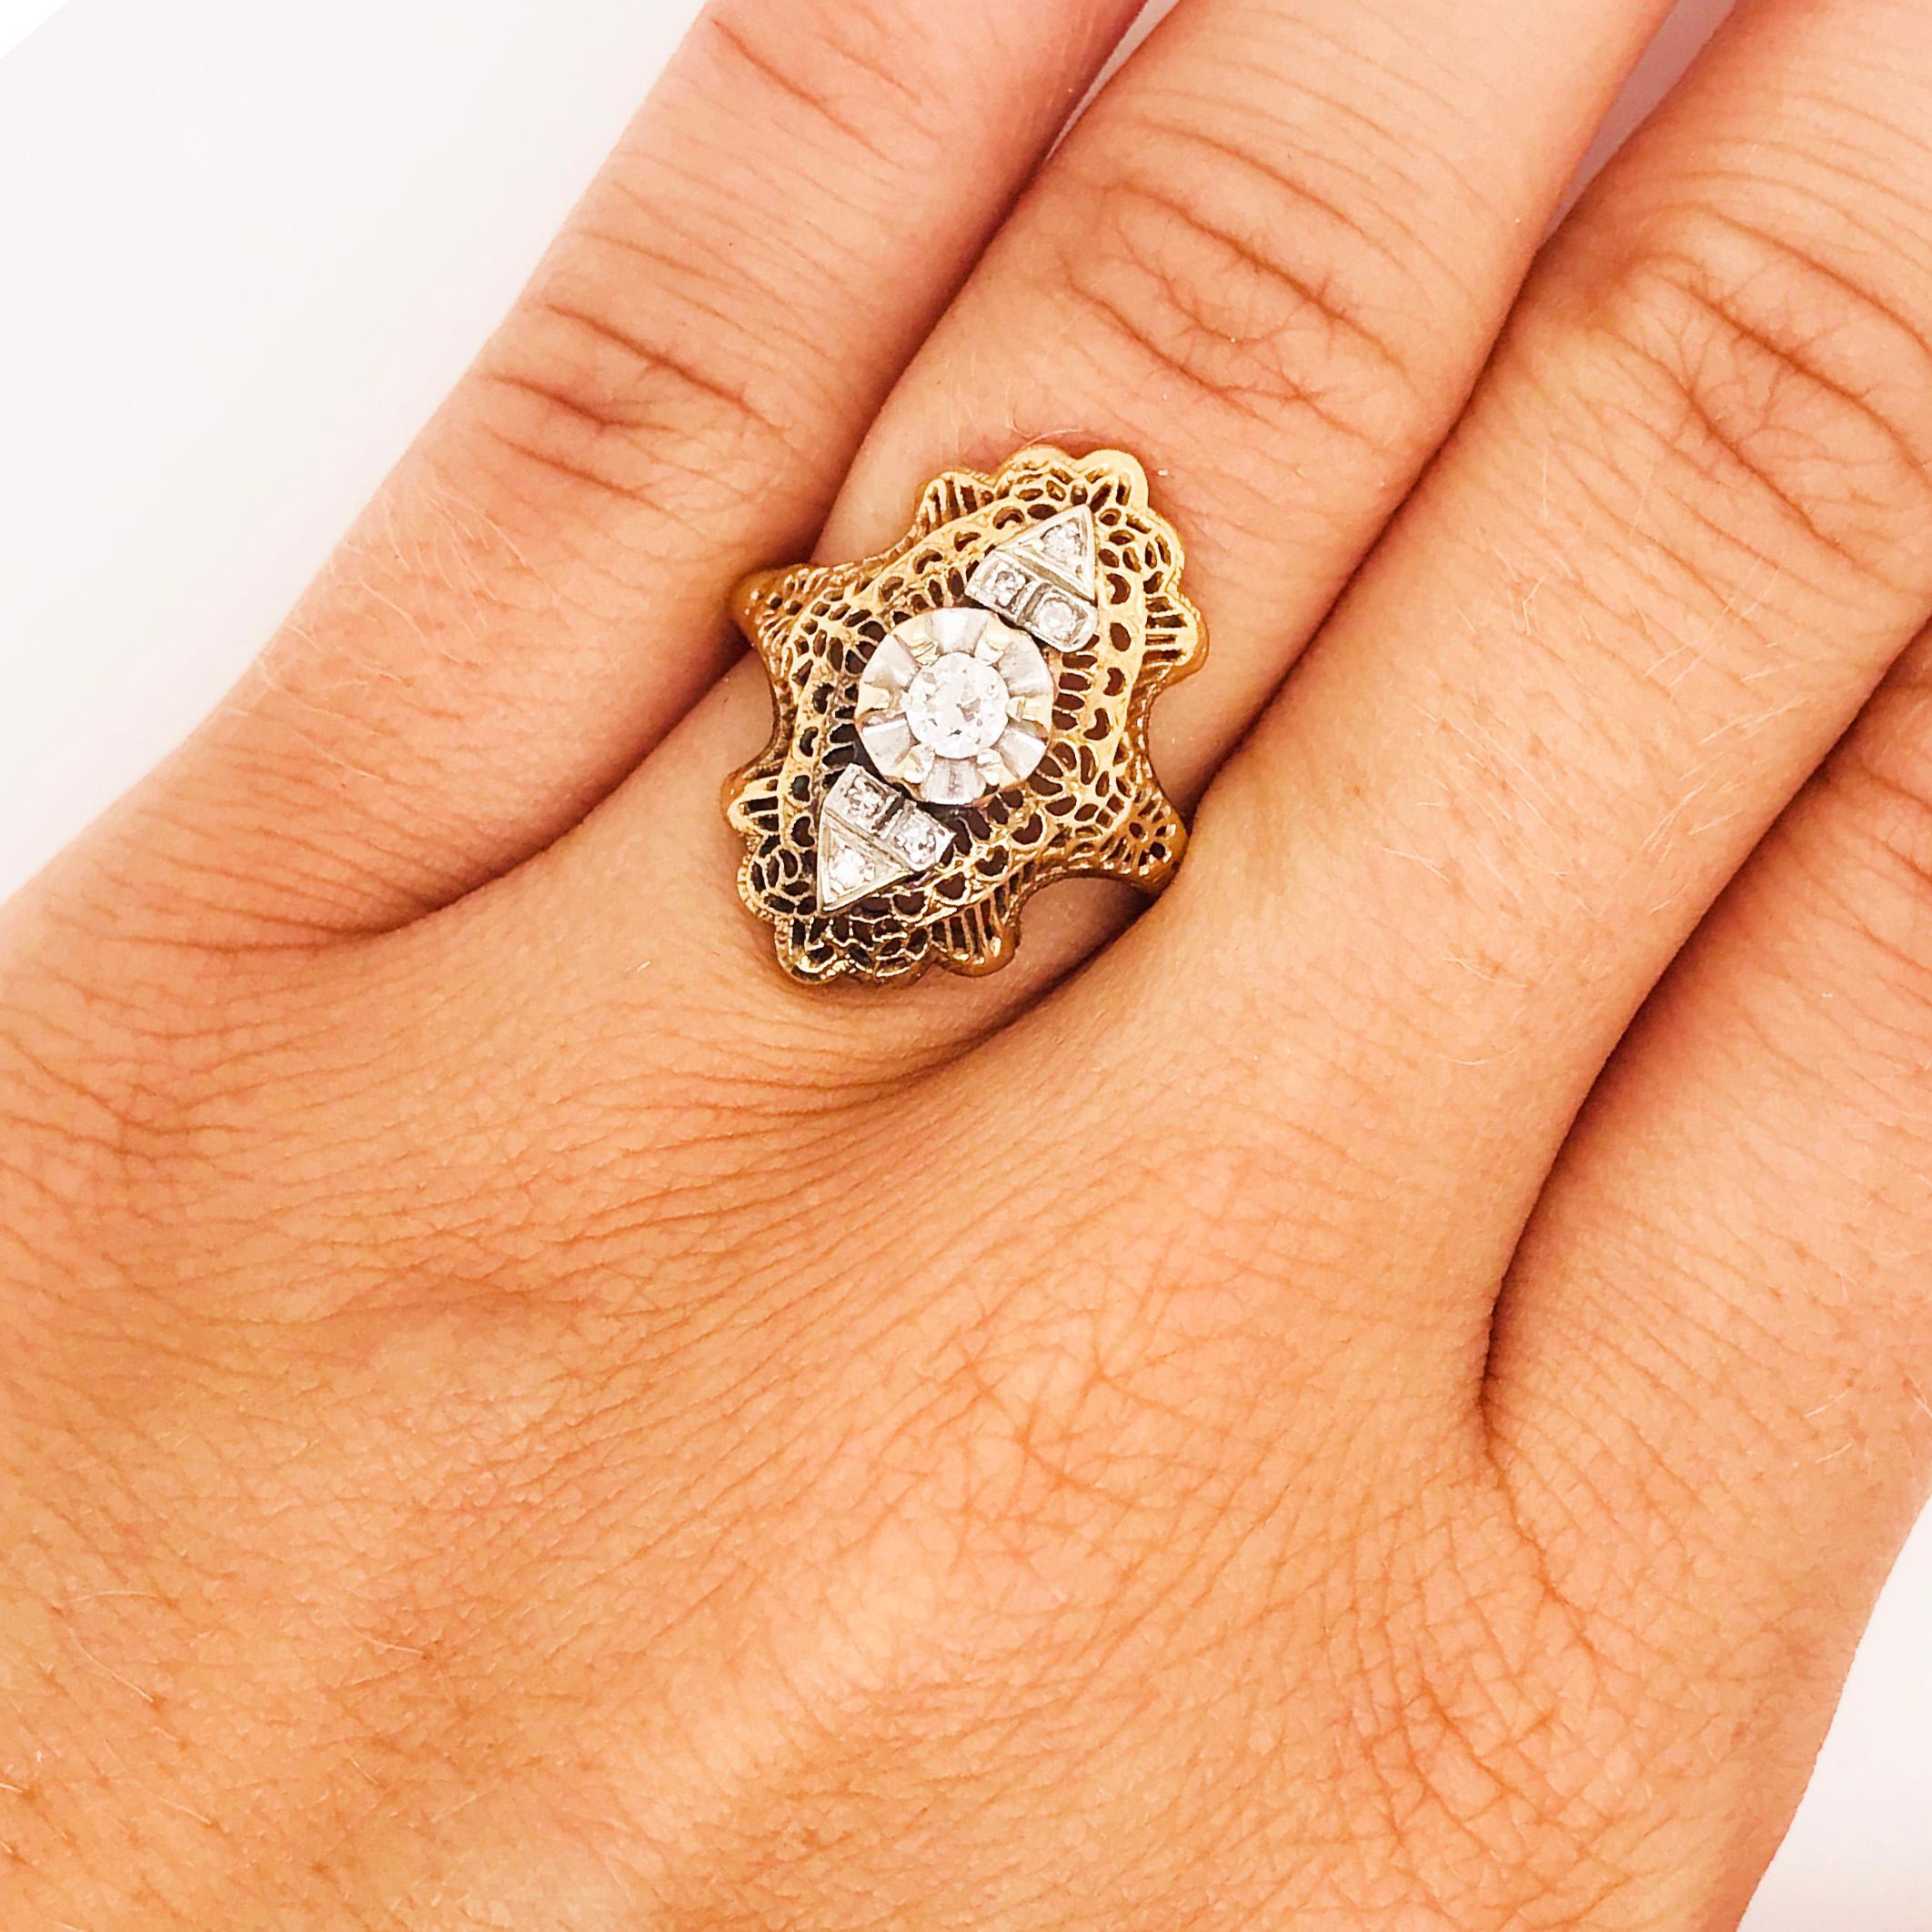 The 1930's were romantic, classy and decorative. The 1920-30 time period is well known for its fashion trends and Art Deco design. This ring embodies the true Art Deco 1930's perfectly. This filigree, diamond dinner ring has an open filigree design